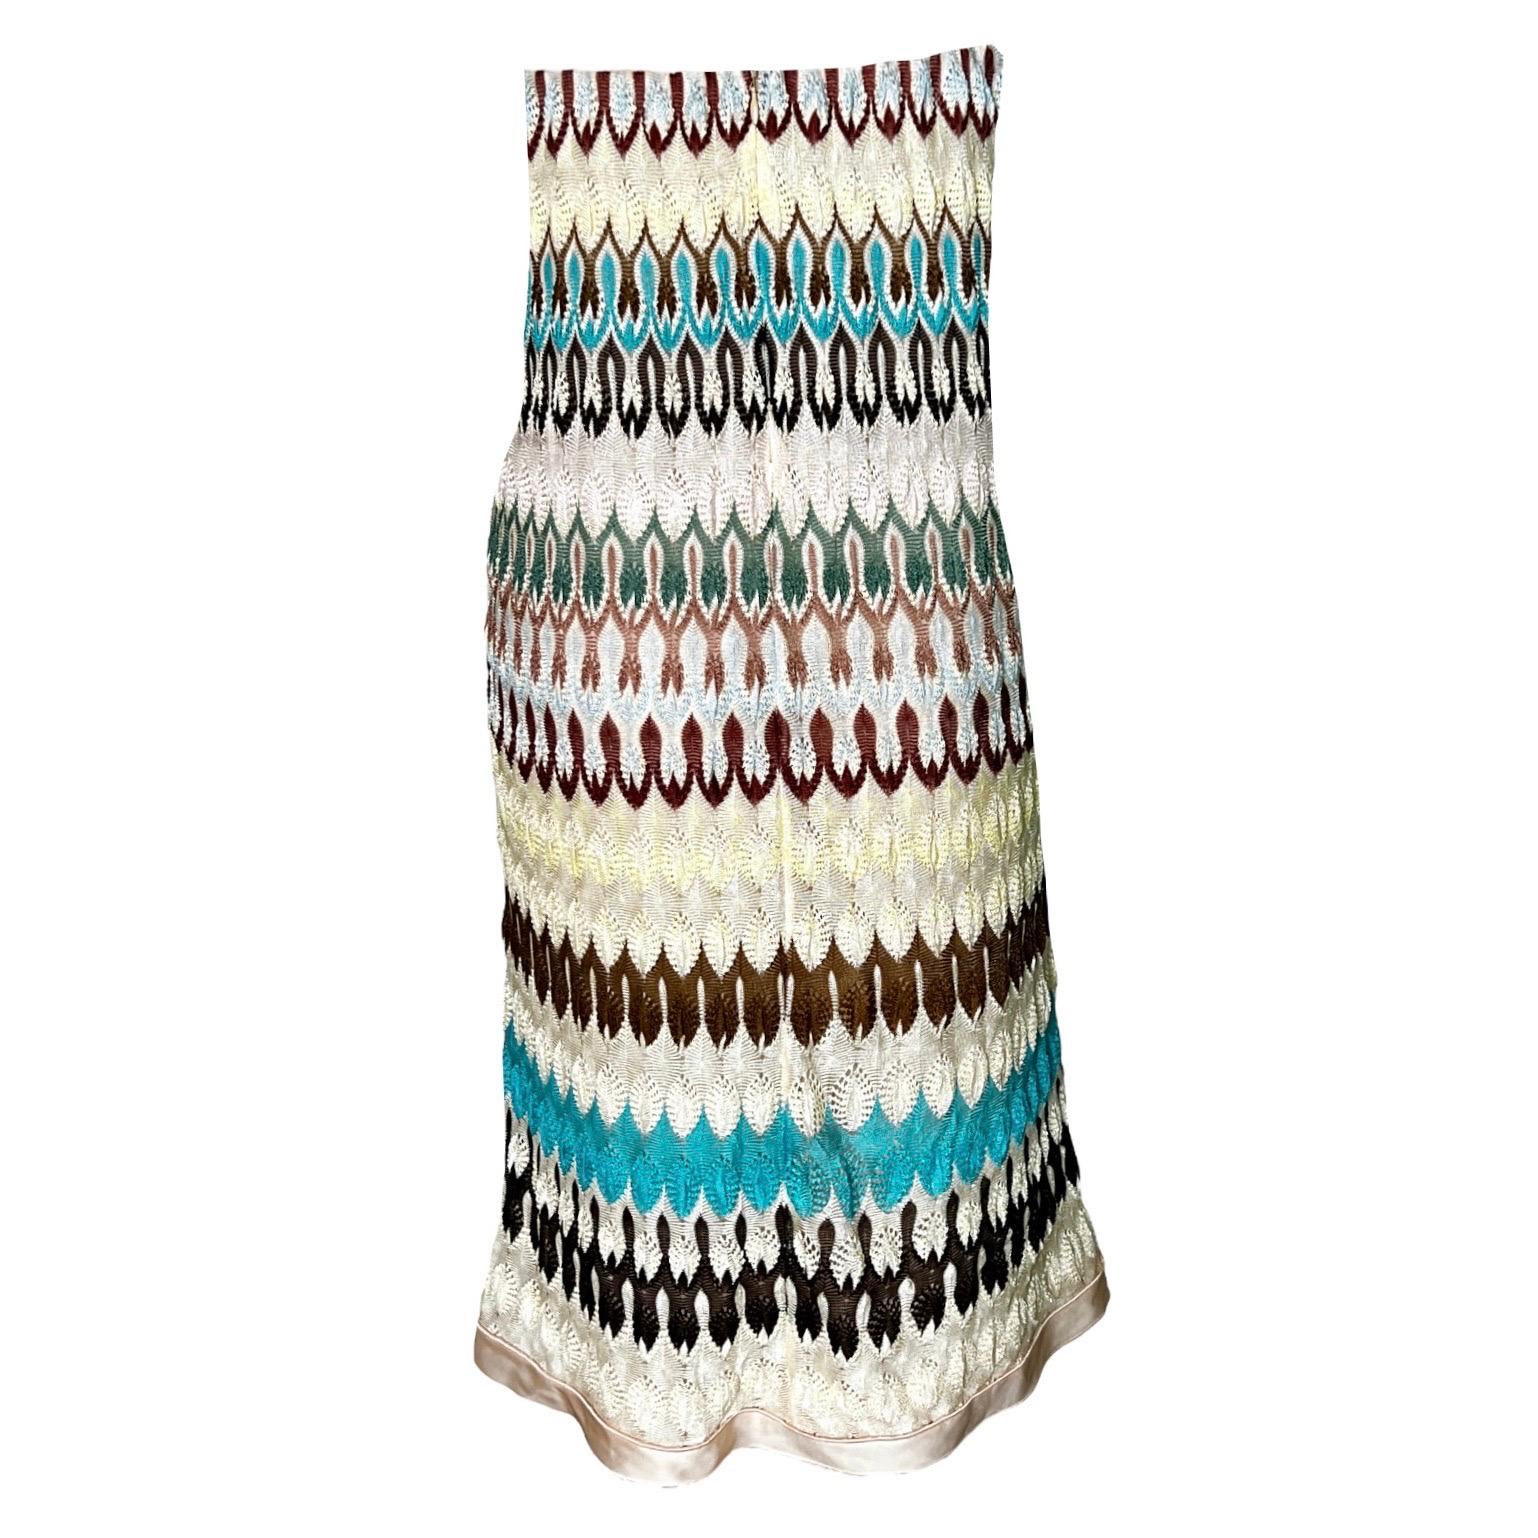 Classic MISSONI signature crochet-knit
Beautiful colors
Simply slips on
Closes with zipper
Corset inside for a perfect fit
Fully lined with finest stretchy silk
Dry Clean only
Made in Italy
Size 44
New
Retails for 3749$ plus taxes


Please refer to